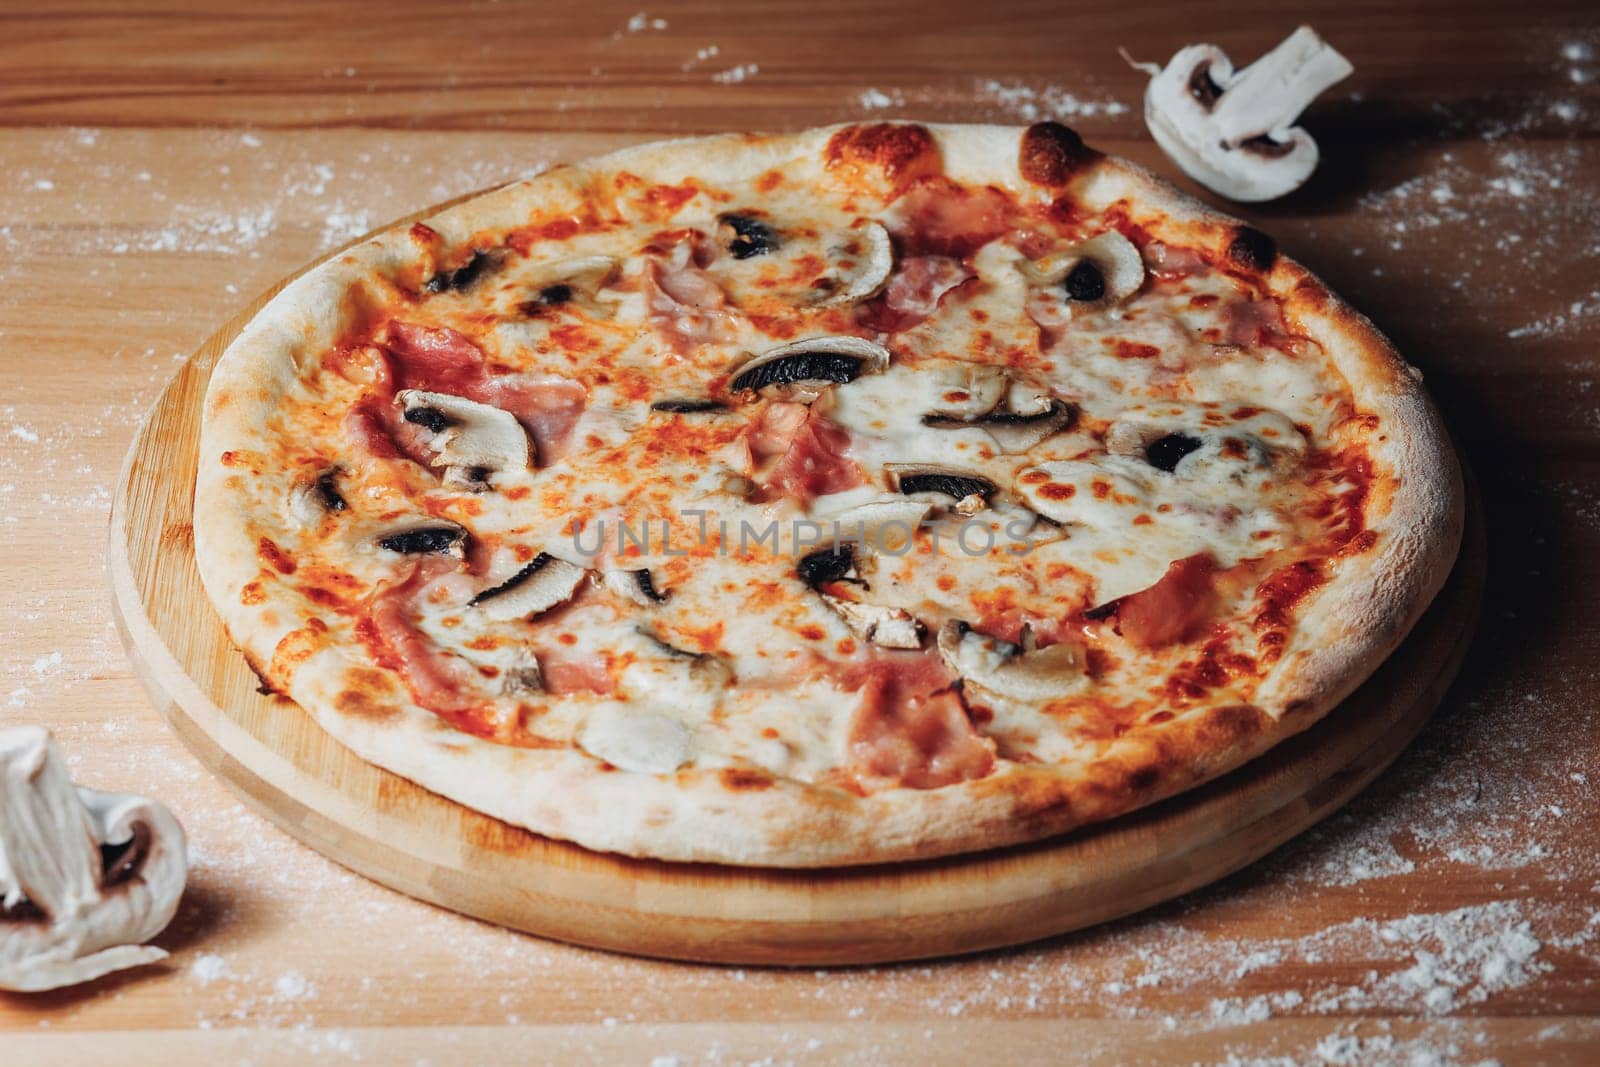 A freshly baked pizza with bubbling cheese, sitting enticingly on a weathered wooden table.